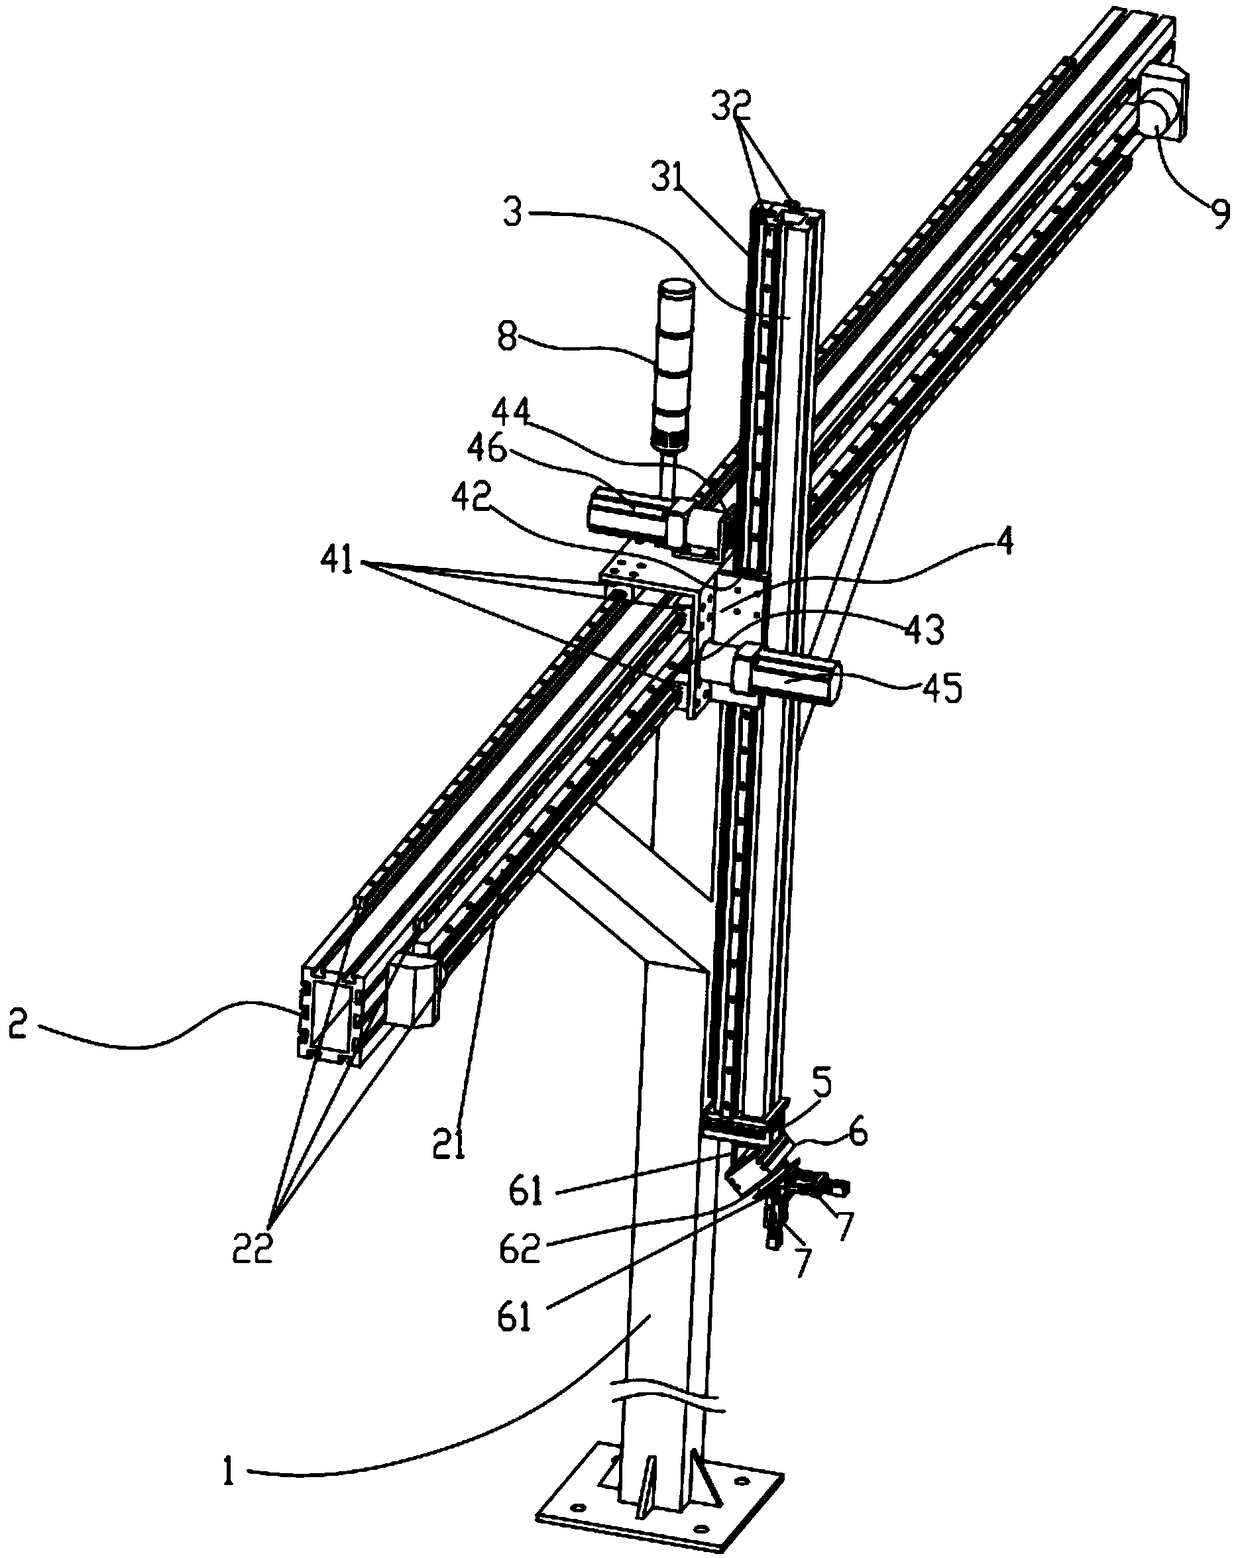 Material carrying truss